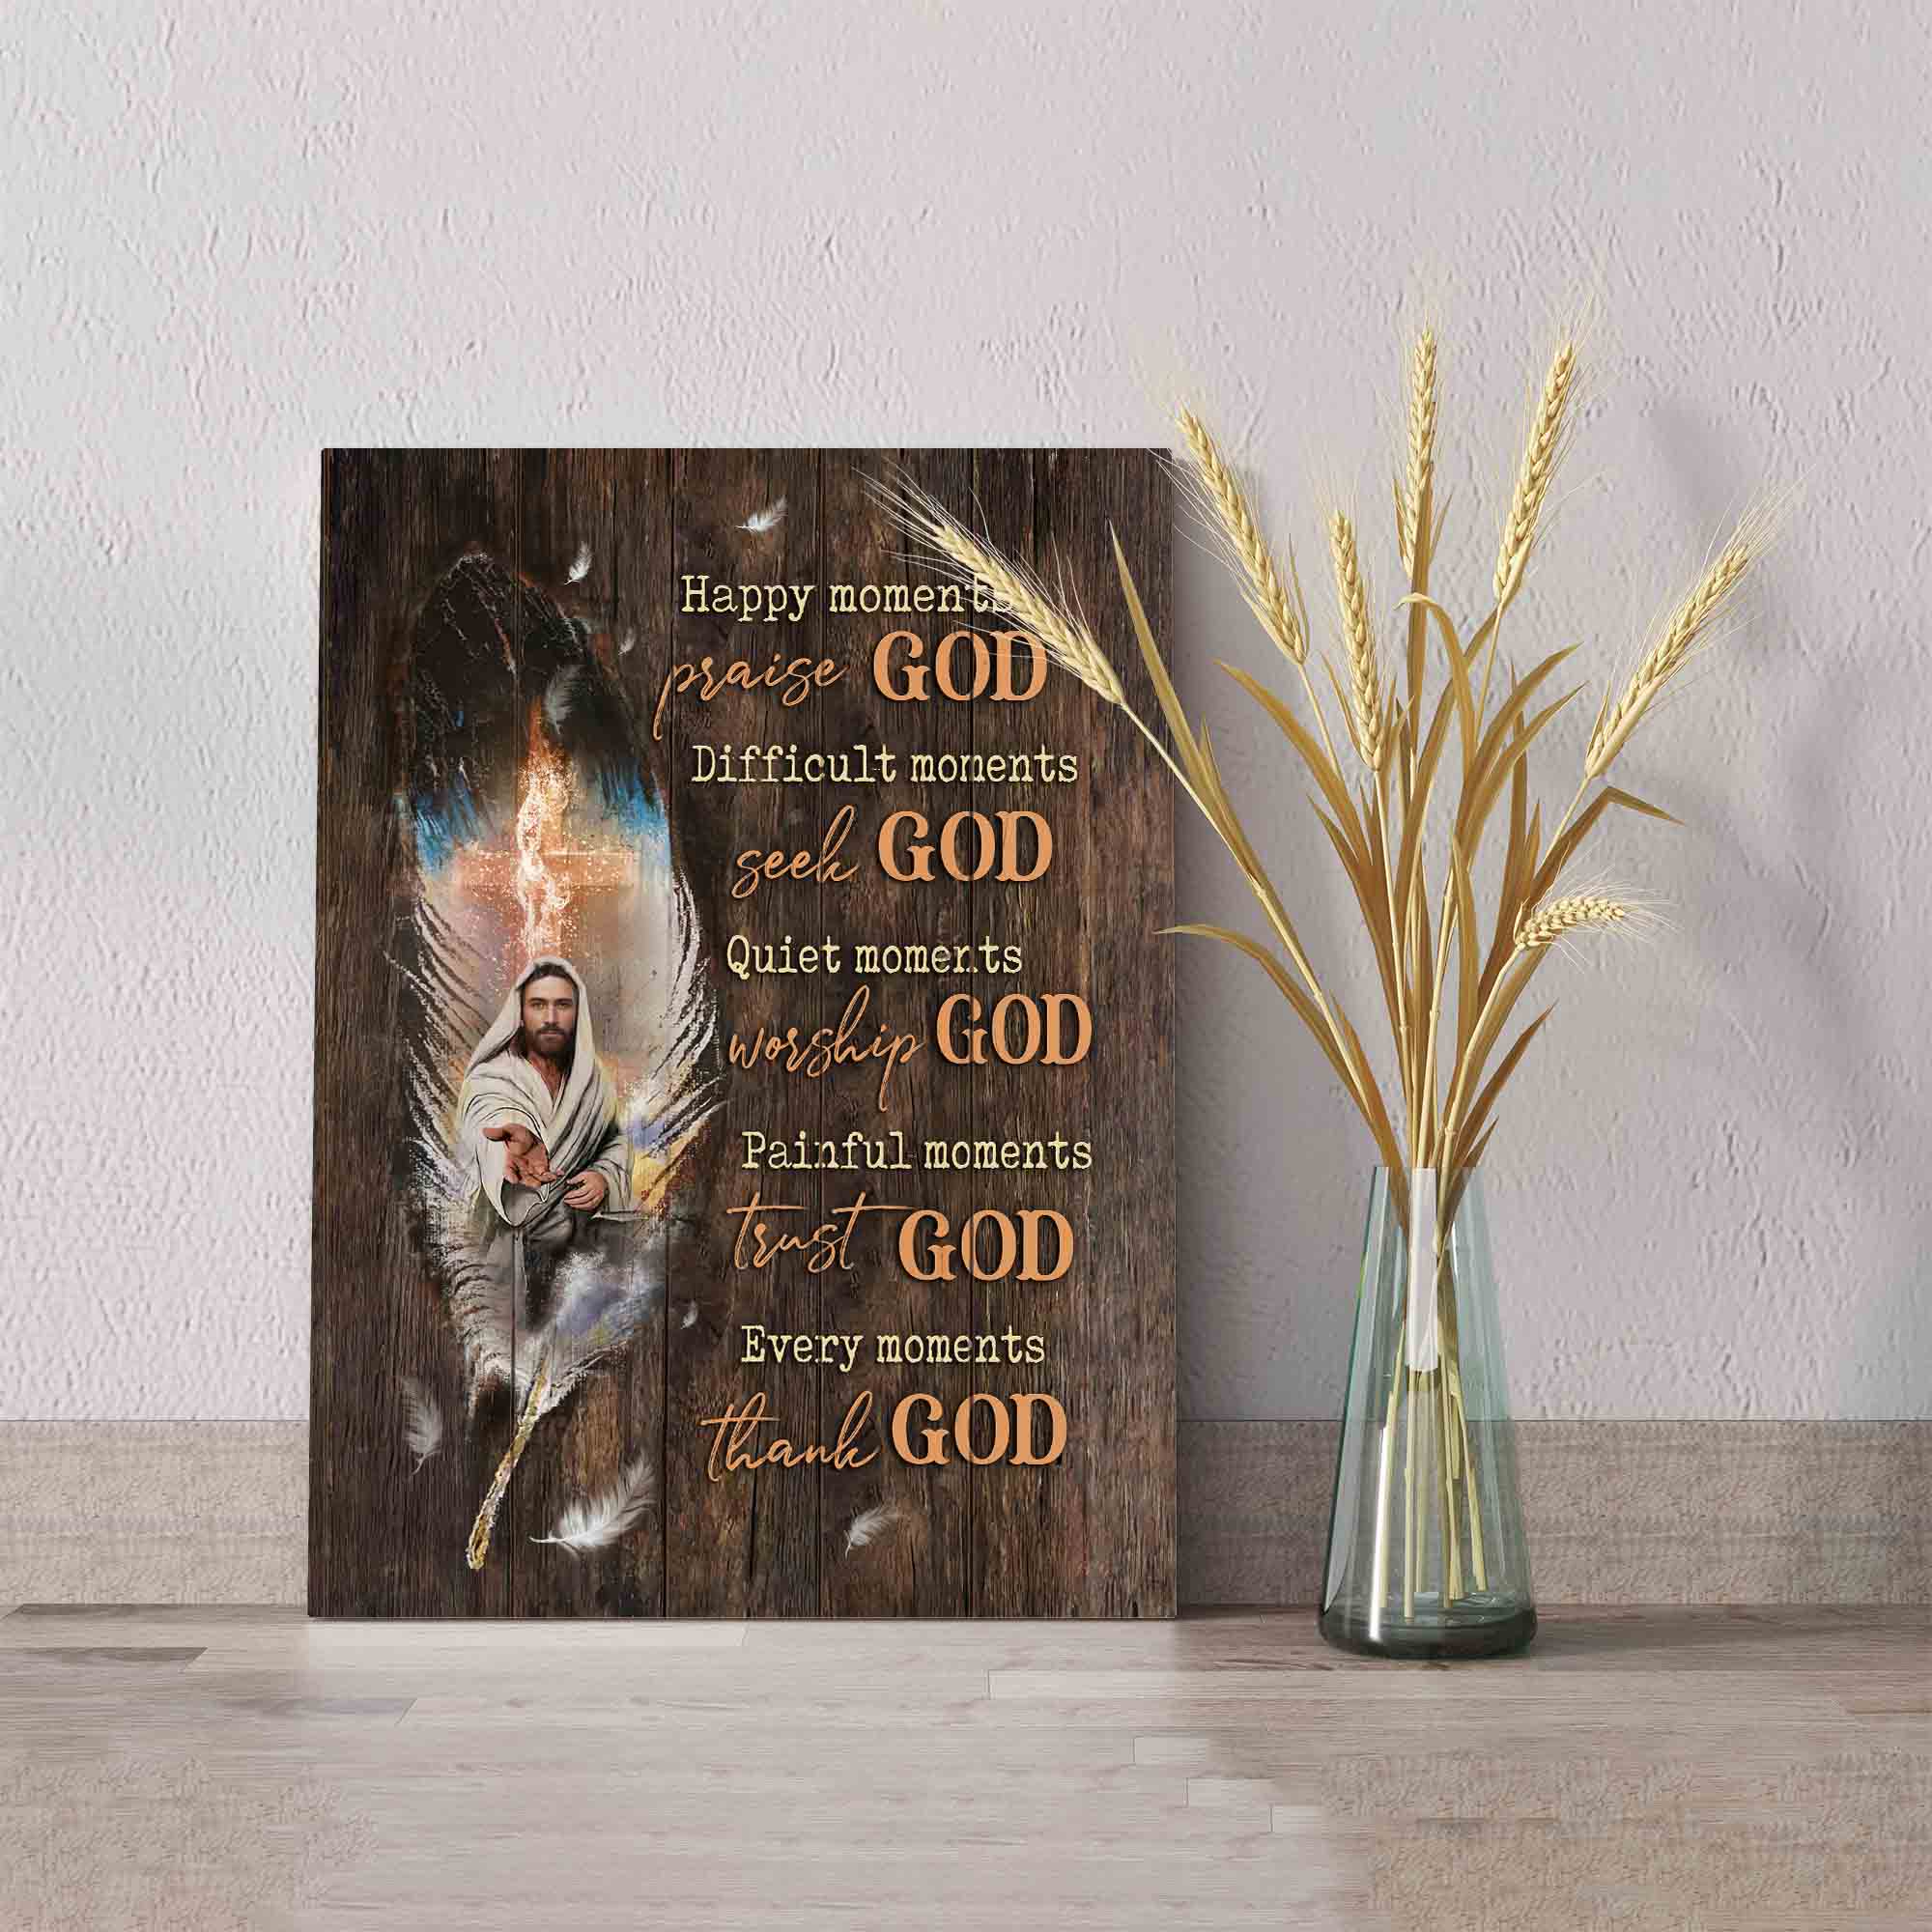 Happy Moments Praise God Canvas, The Hand Of God Canvas, Jesus Canvas, God Canvas, Family Canvas, Canvas Wall Art